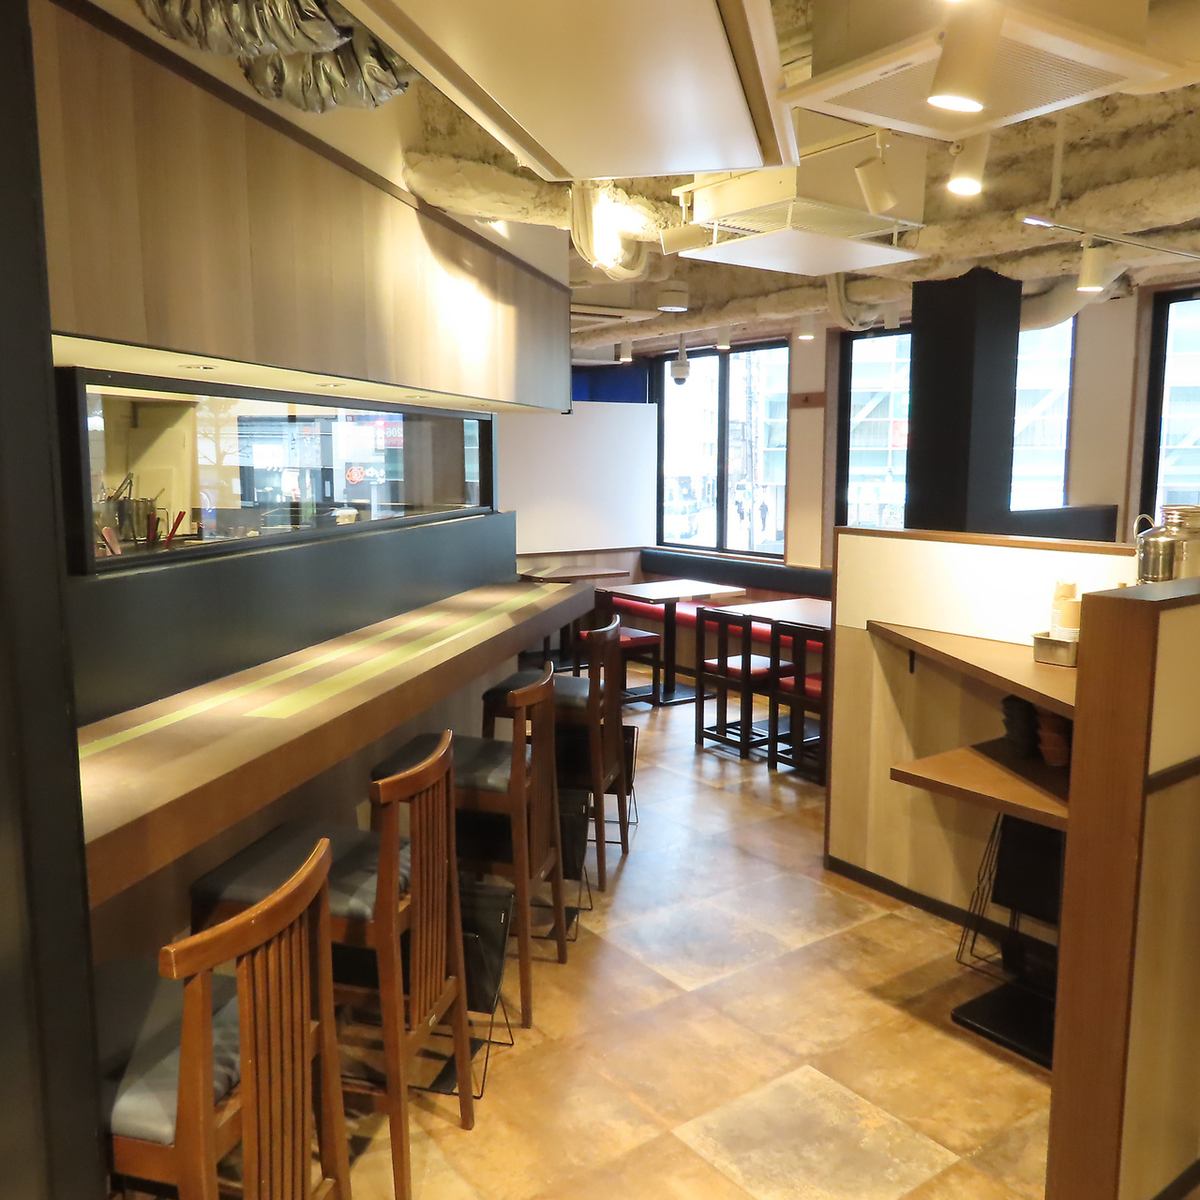 We offer counter seats and table seats in our modern Japanese interior.